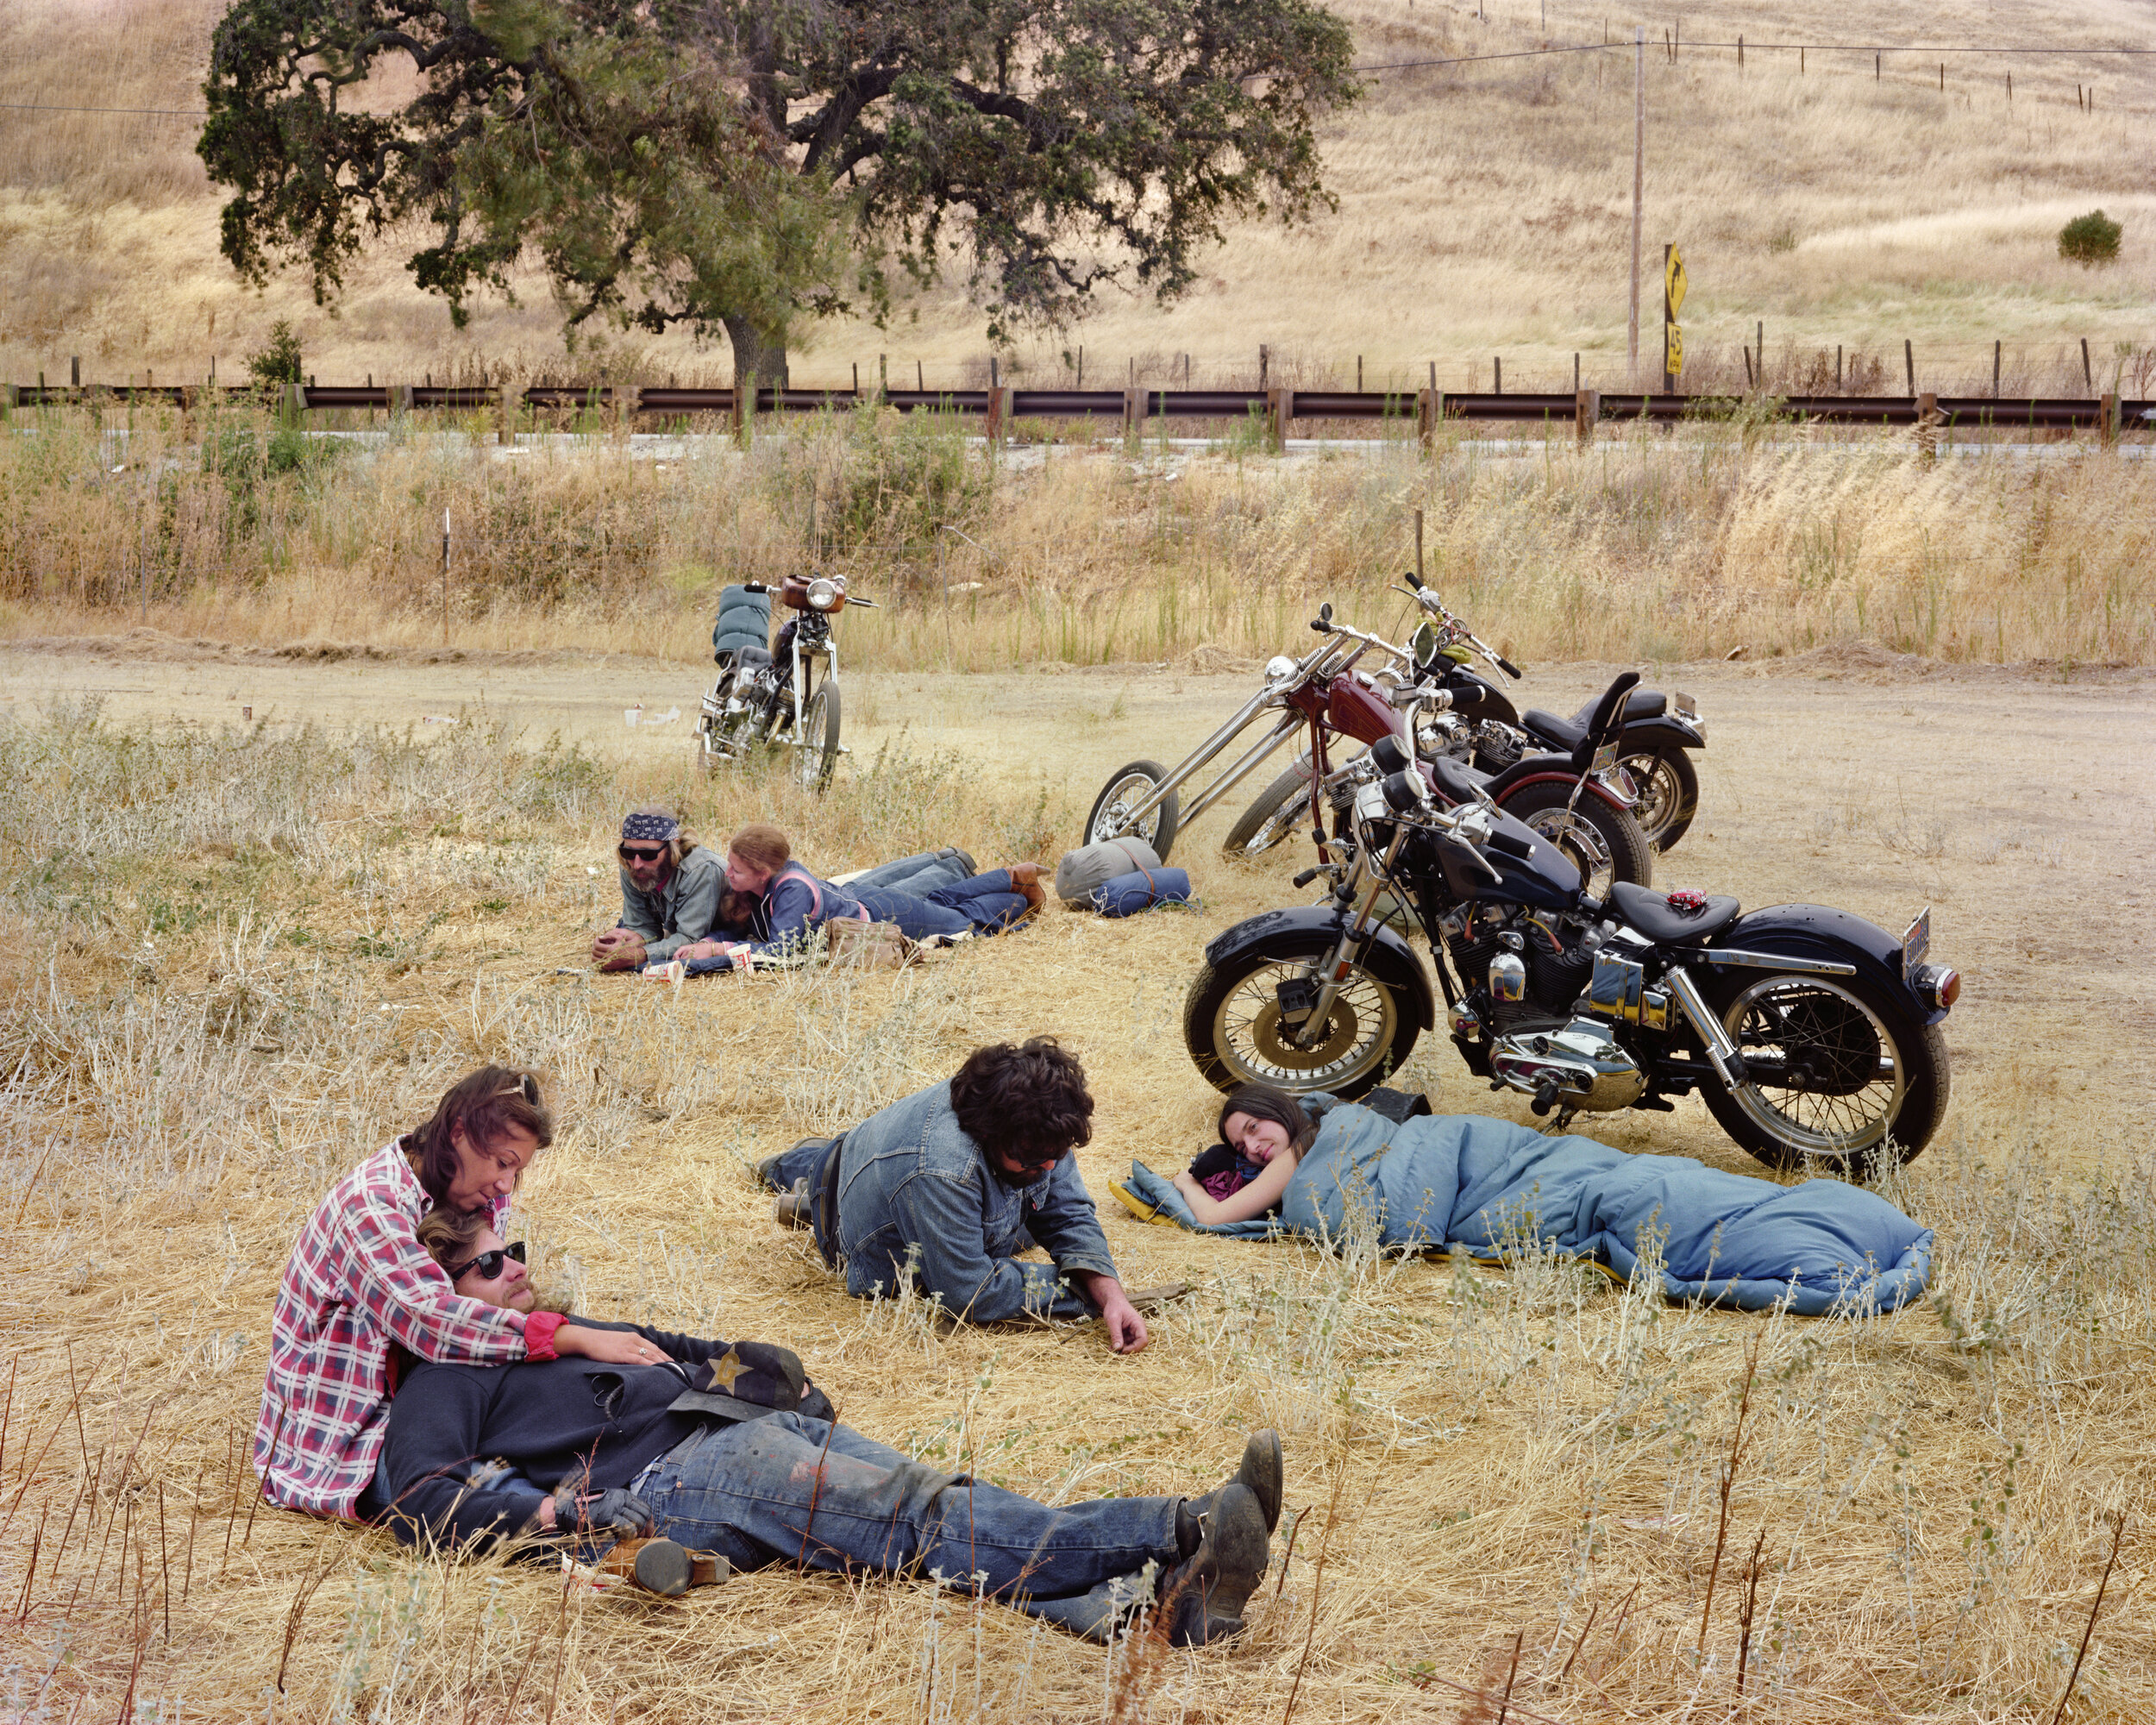 Motorcyclists, California, March 1988